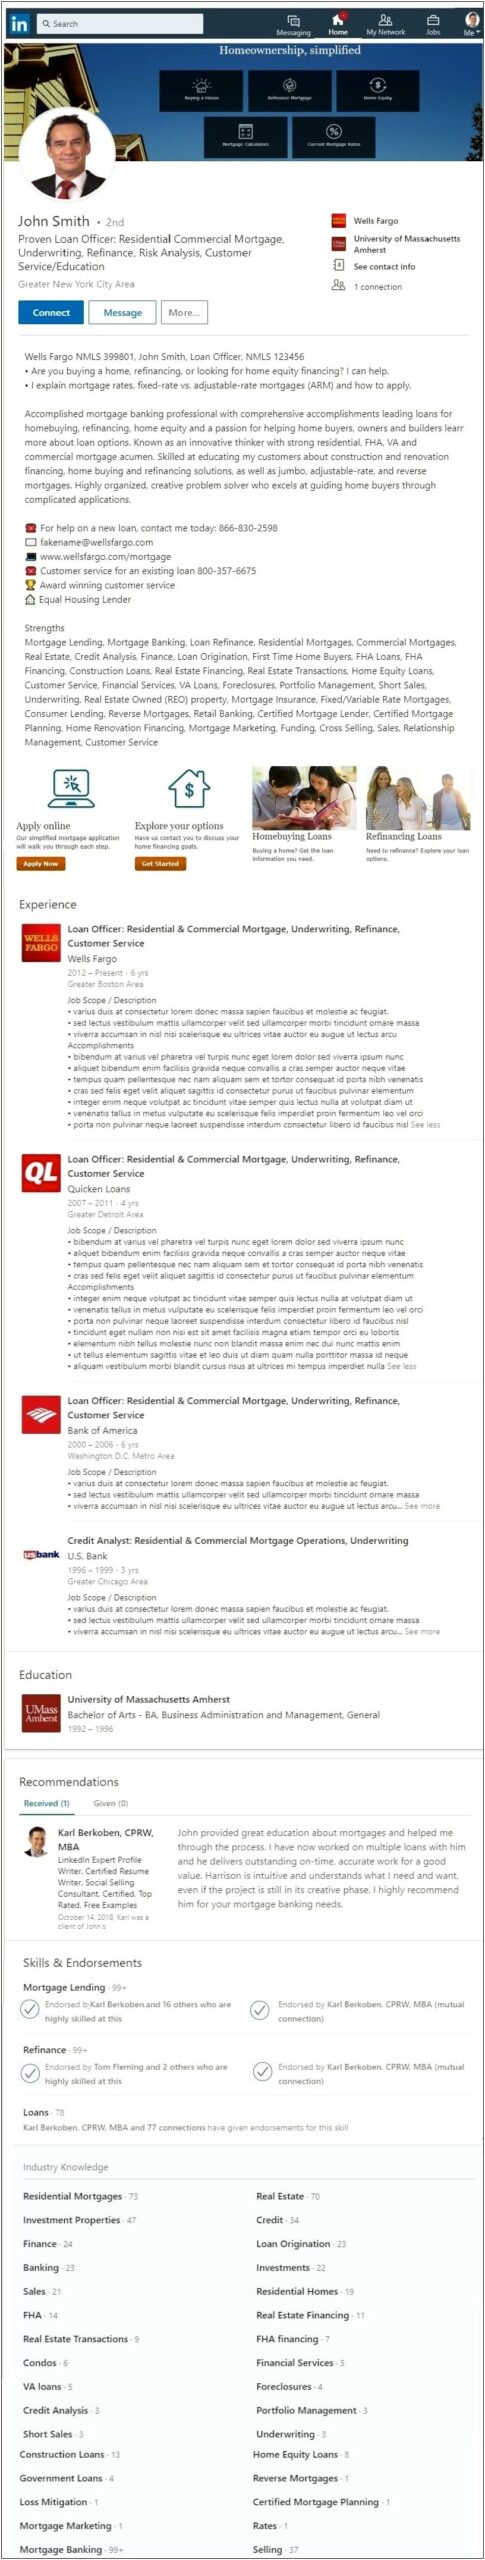 Mortgage Loan Officer Resume Objective Statement